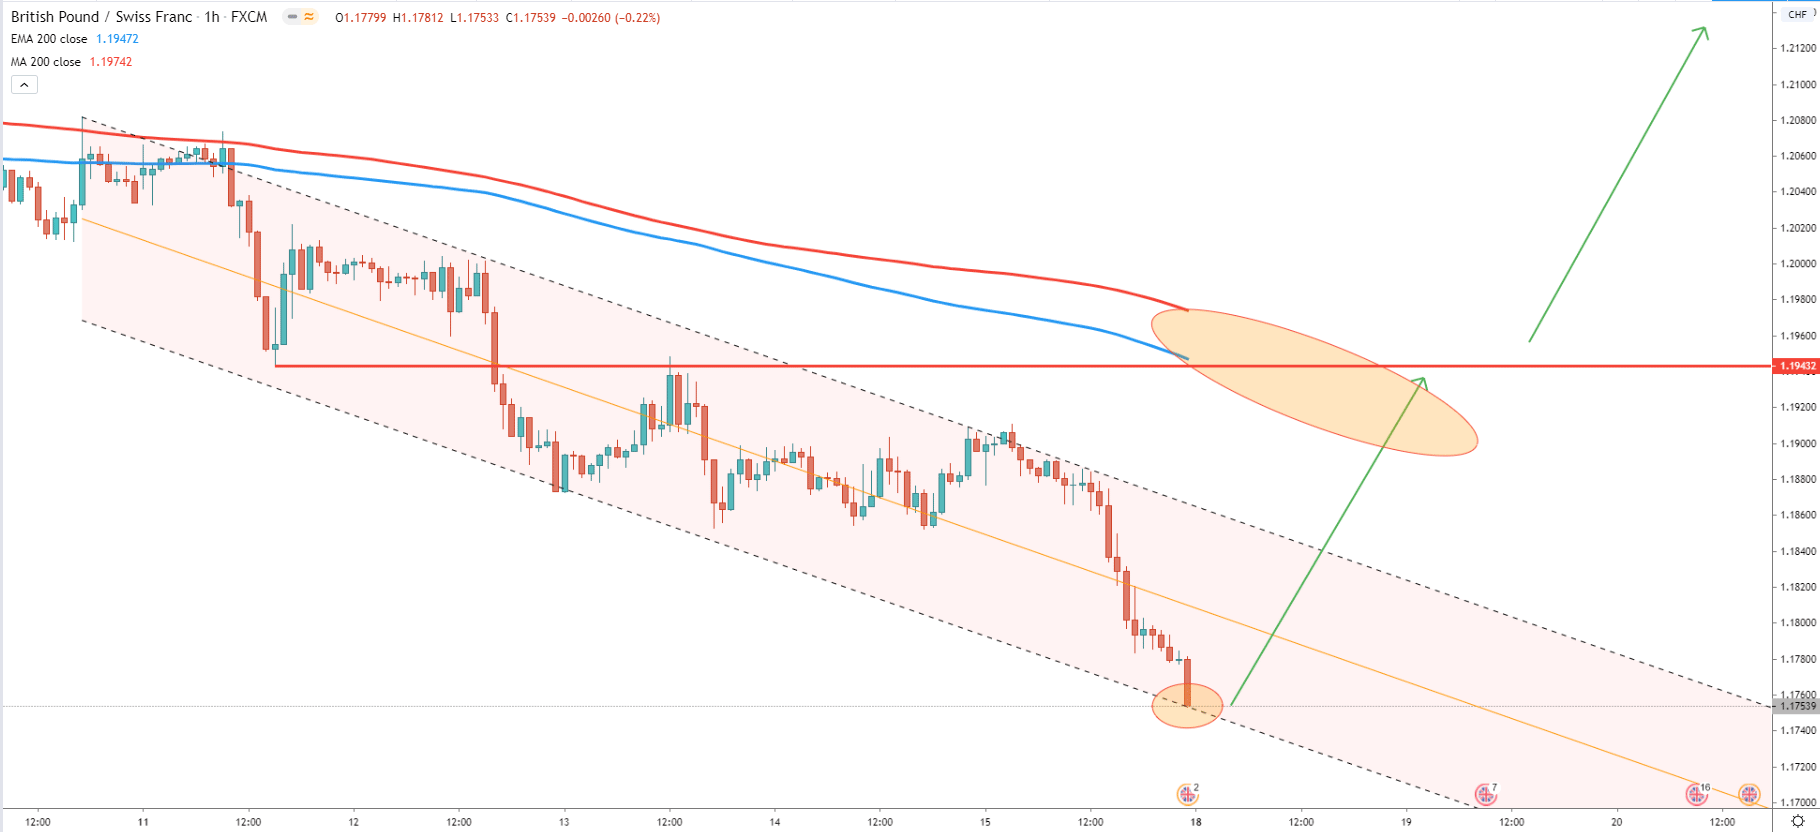 GBP/CHF 1-Hour Technical Analysis 15 May 2020